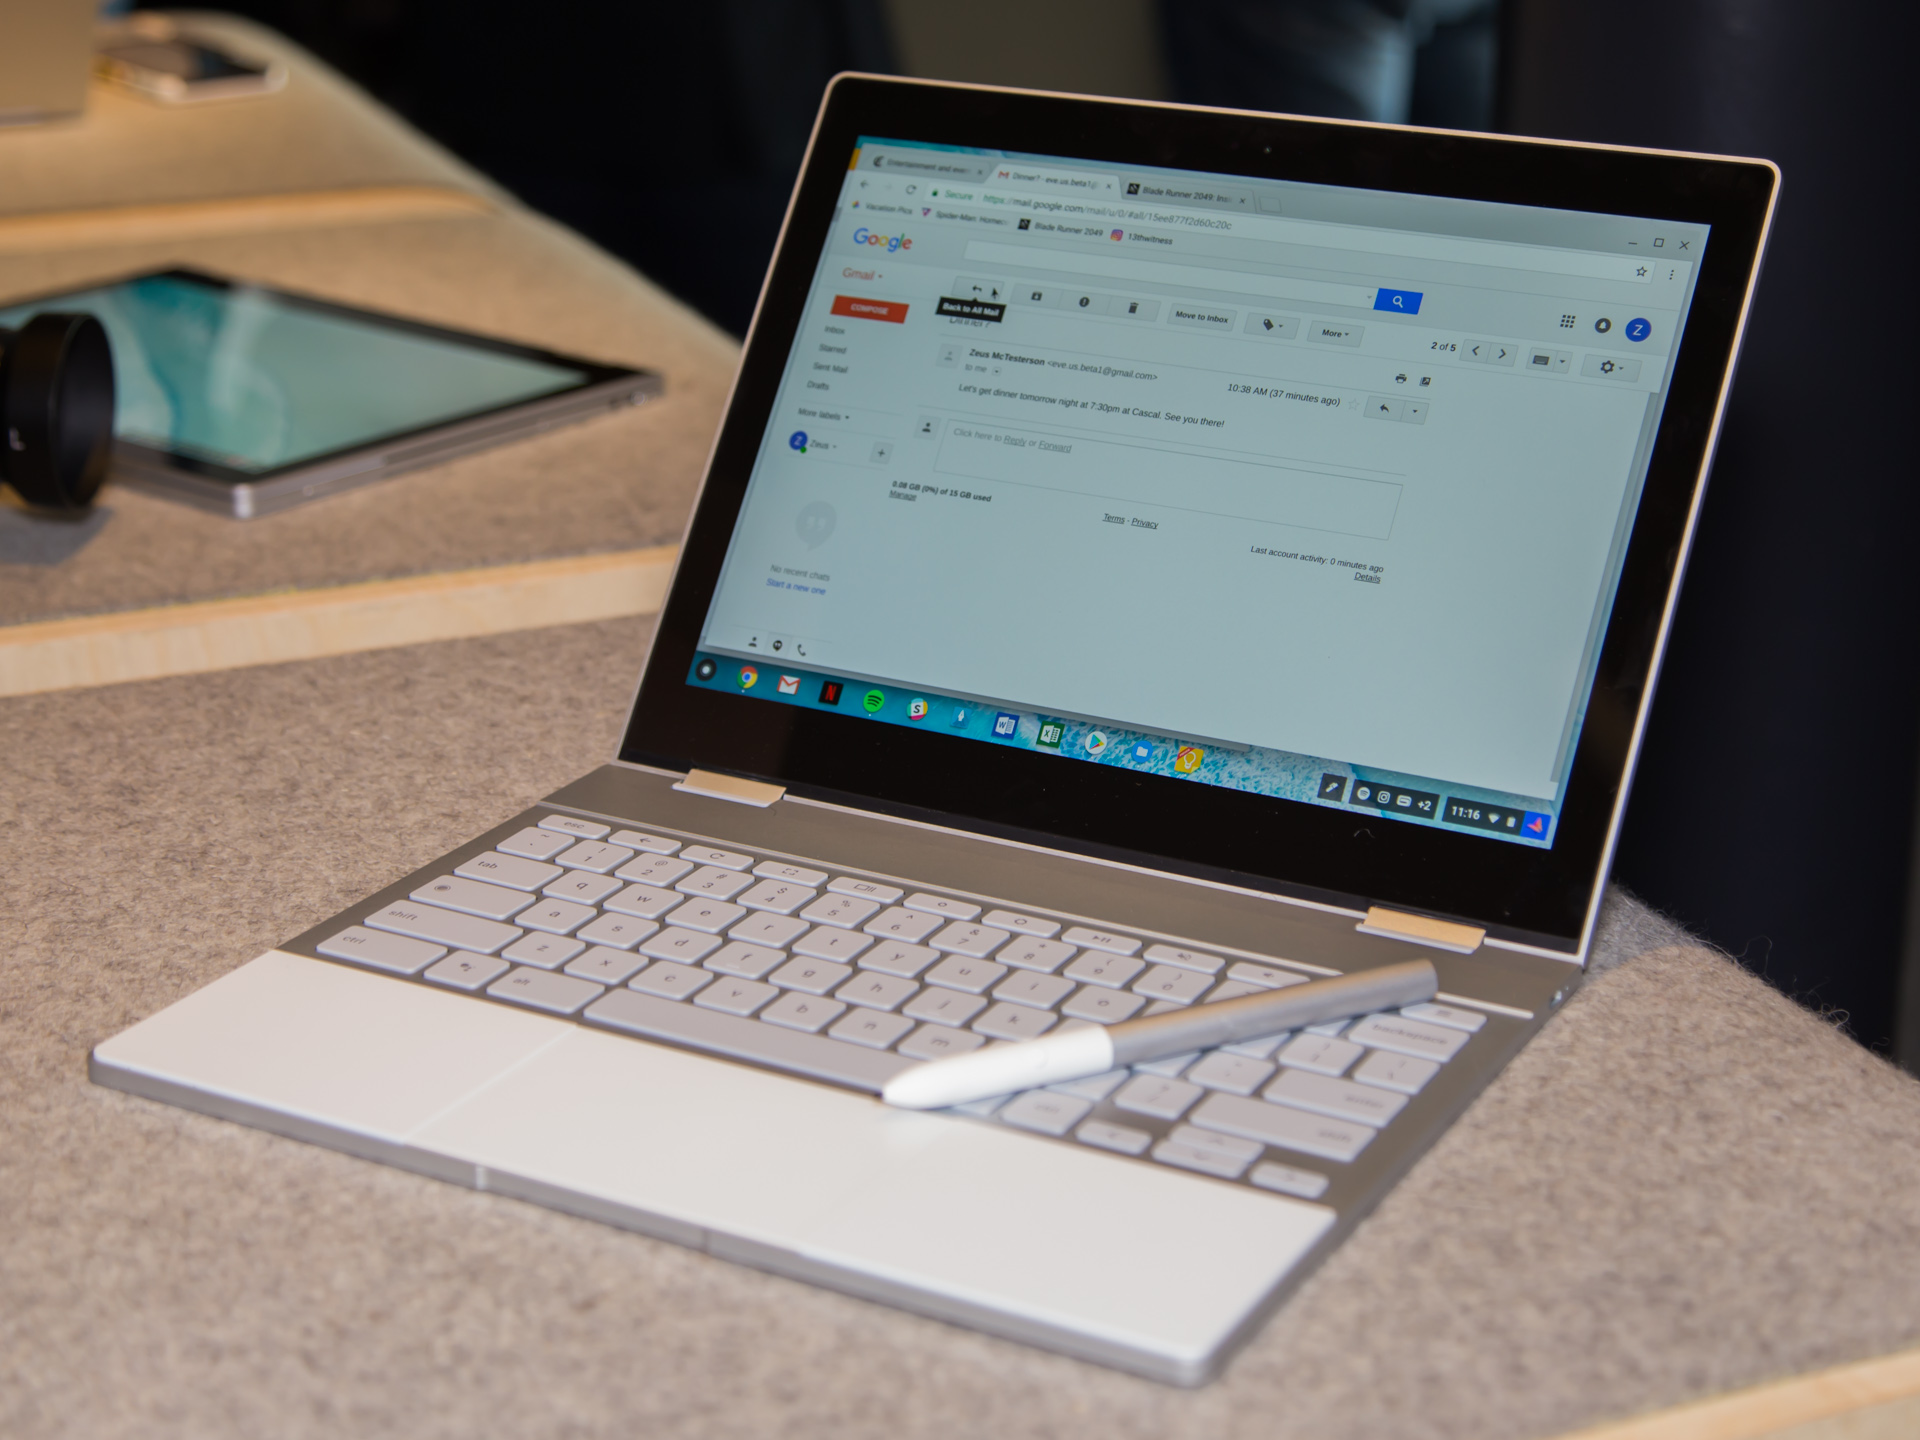 Google Pixelbook hands-on: Stunning hardware with the usual limited OS |  Ars Technica